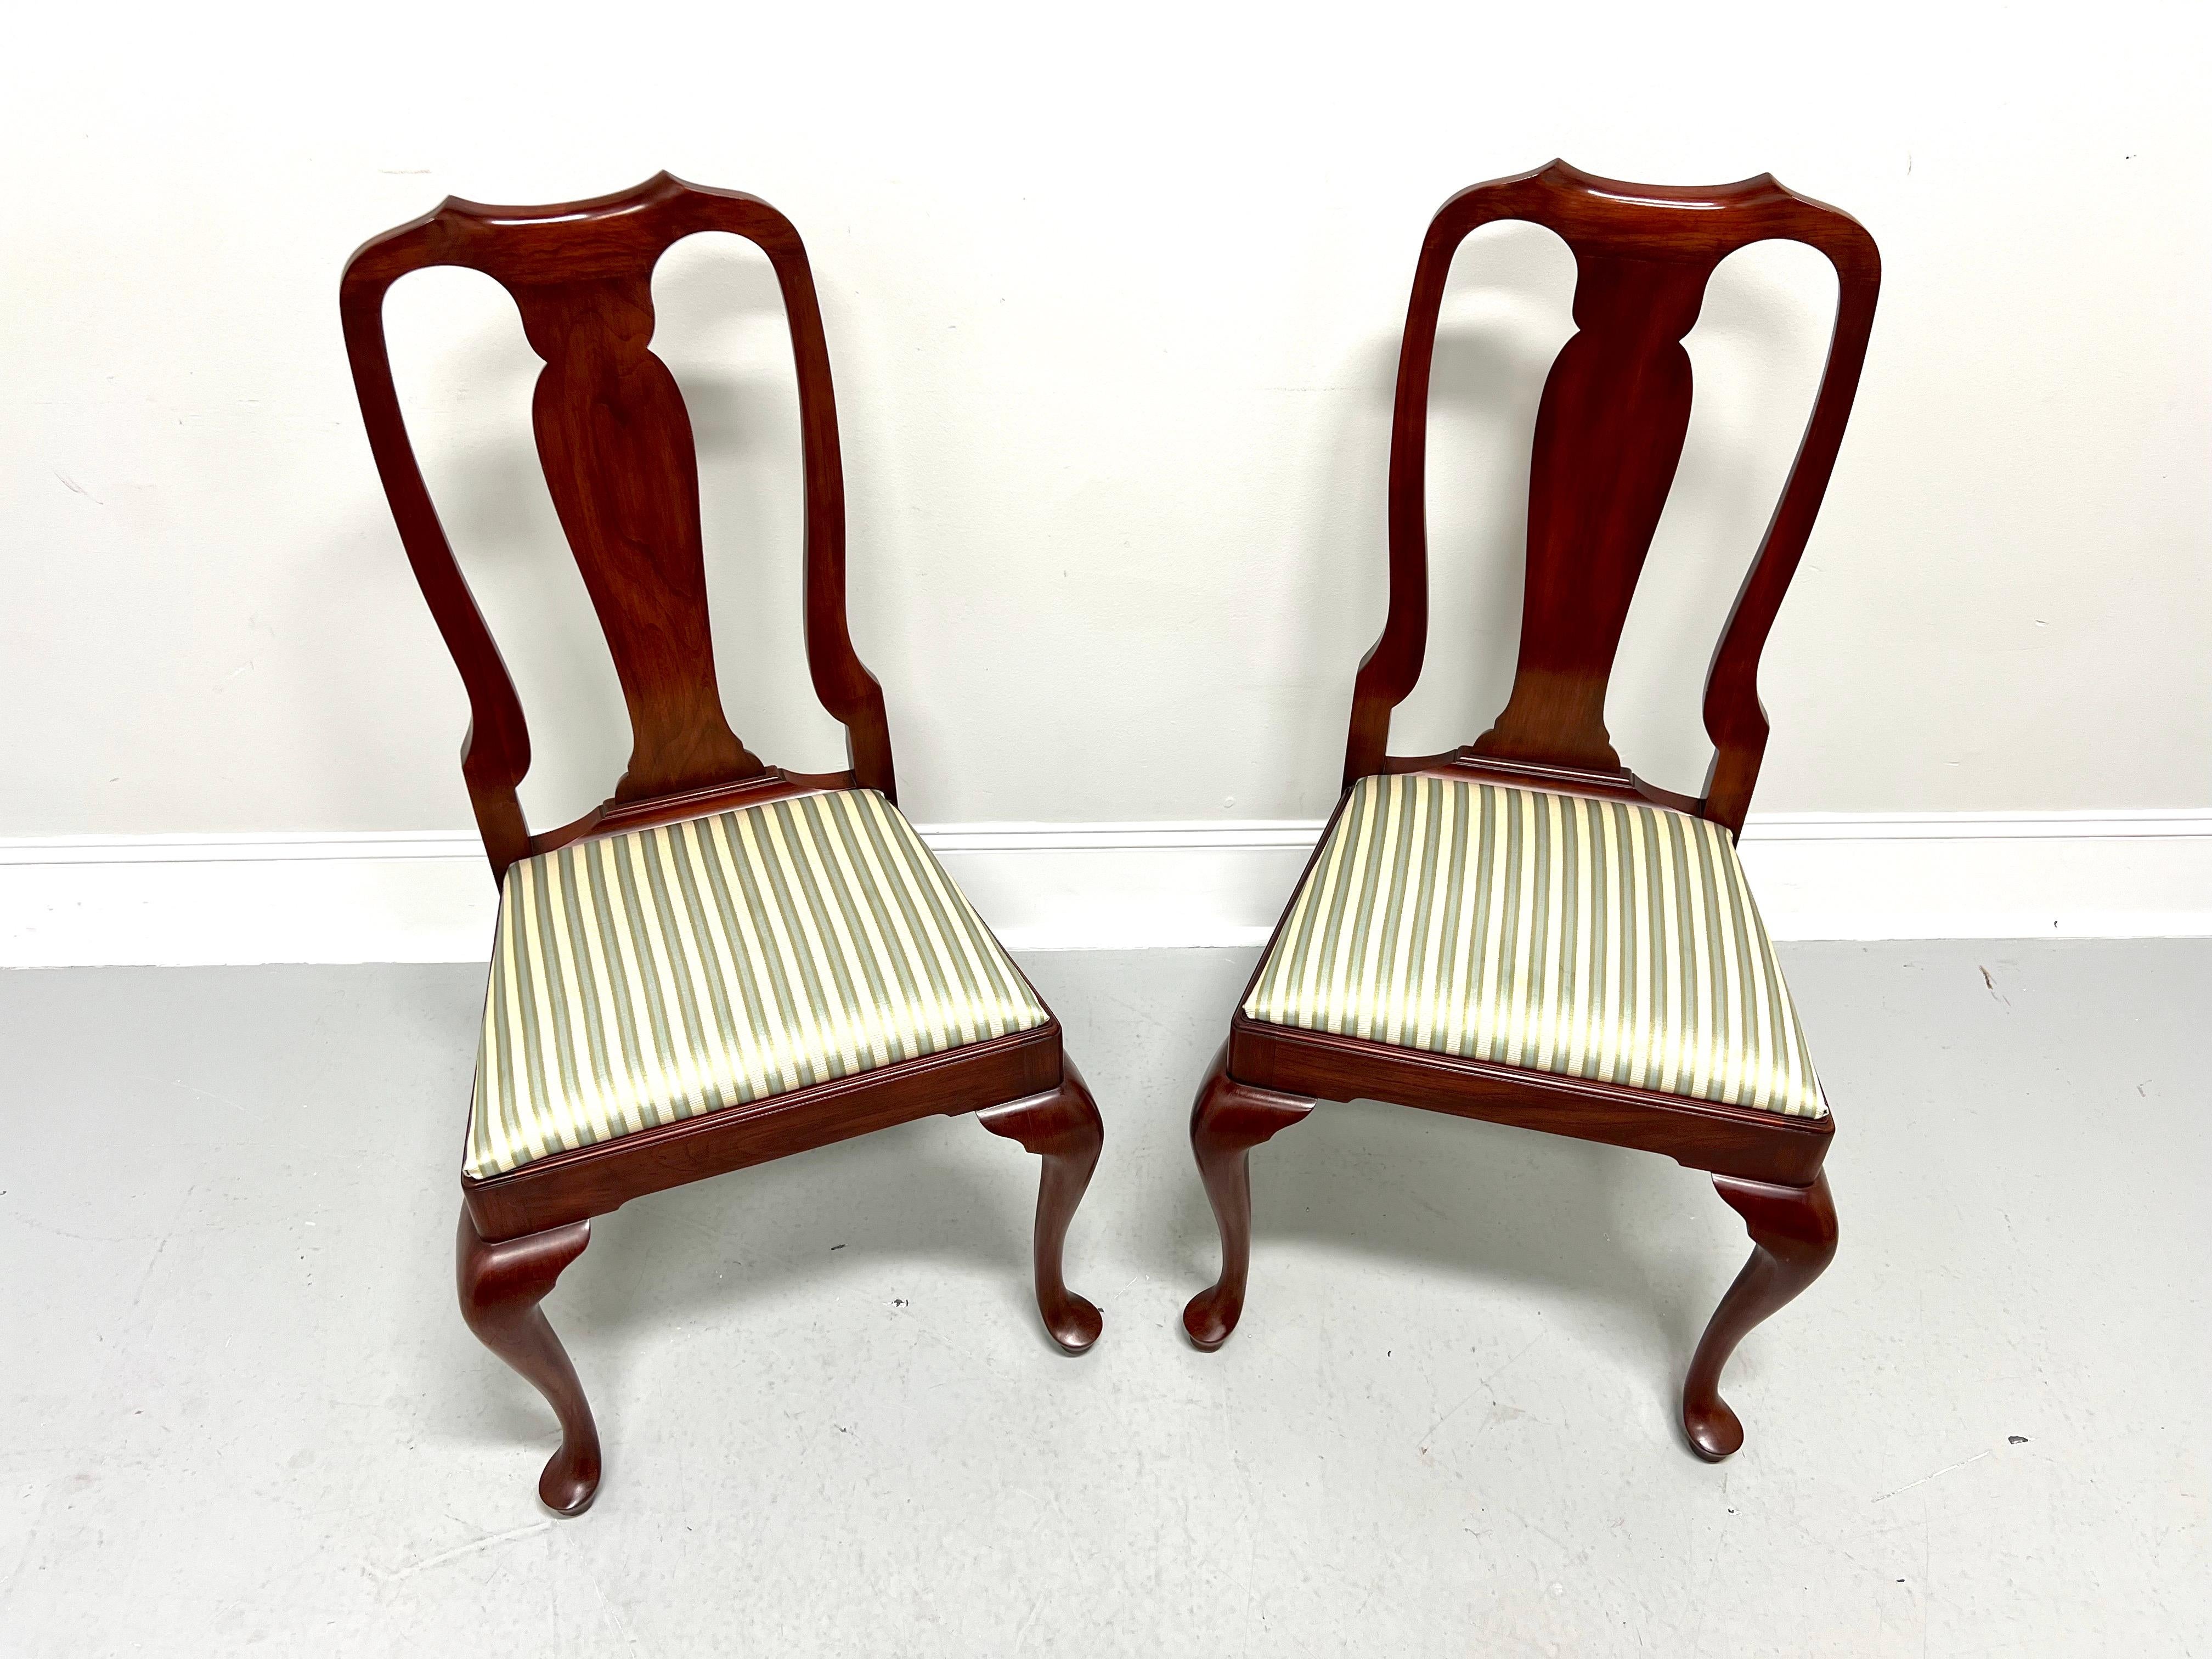 A pair of Queen Anne style dining side chairs by Henkel Harris, of Winchester, Virginia, USA. Solid wild black cherry wood, carved center backrest, upholstered seat in a multi-color stripe patterned fabric, solid apron, cabriole legs, and pad feet.